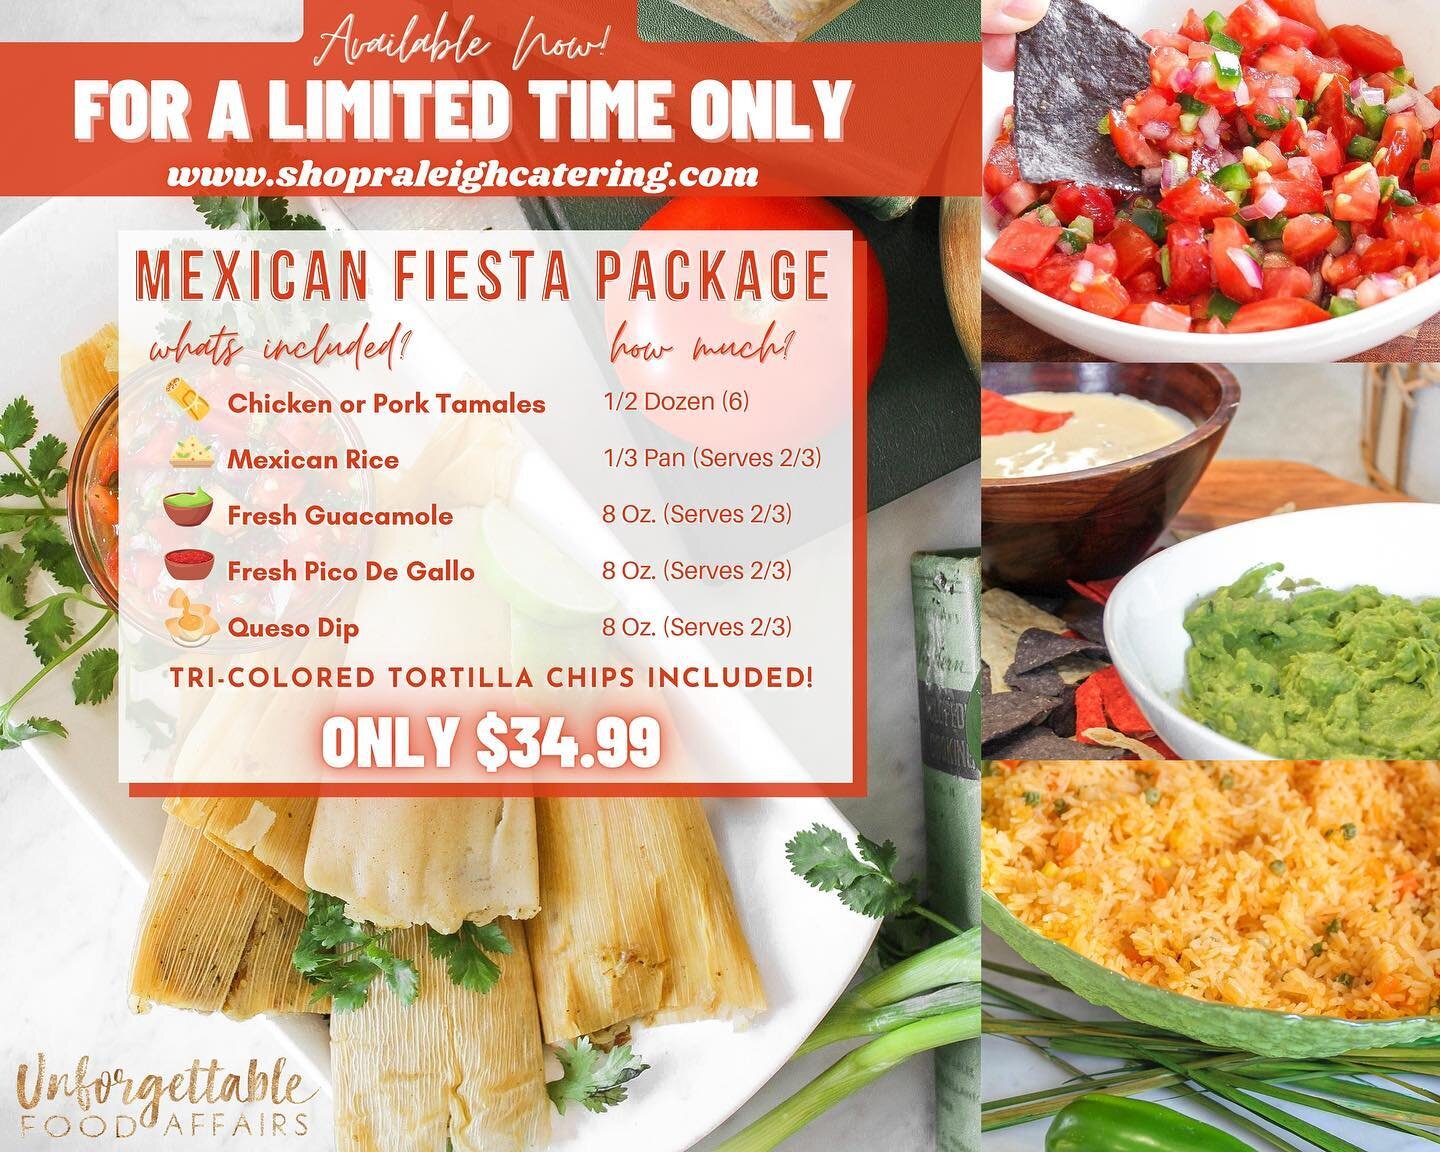 Looking for a quick dinner for the weekend? We&rsquo;ve got you covered! 
ORDER ONLINE TODAY FOR 
 NOW OFFERING FOR A LIMITED TIME ONLY, OUR UNFORGETTABLE MEXICAN FIESTA PACKAGE! &mdash;
 for ONLY $34.99, this is what you&rsquo;ll be receiving: 
Each